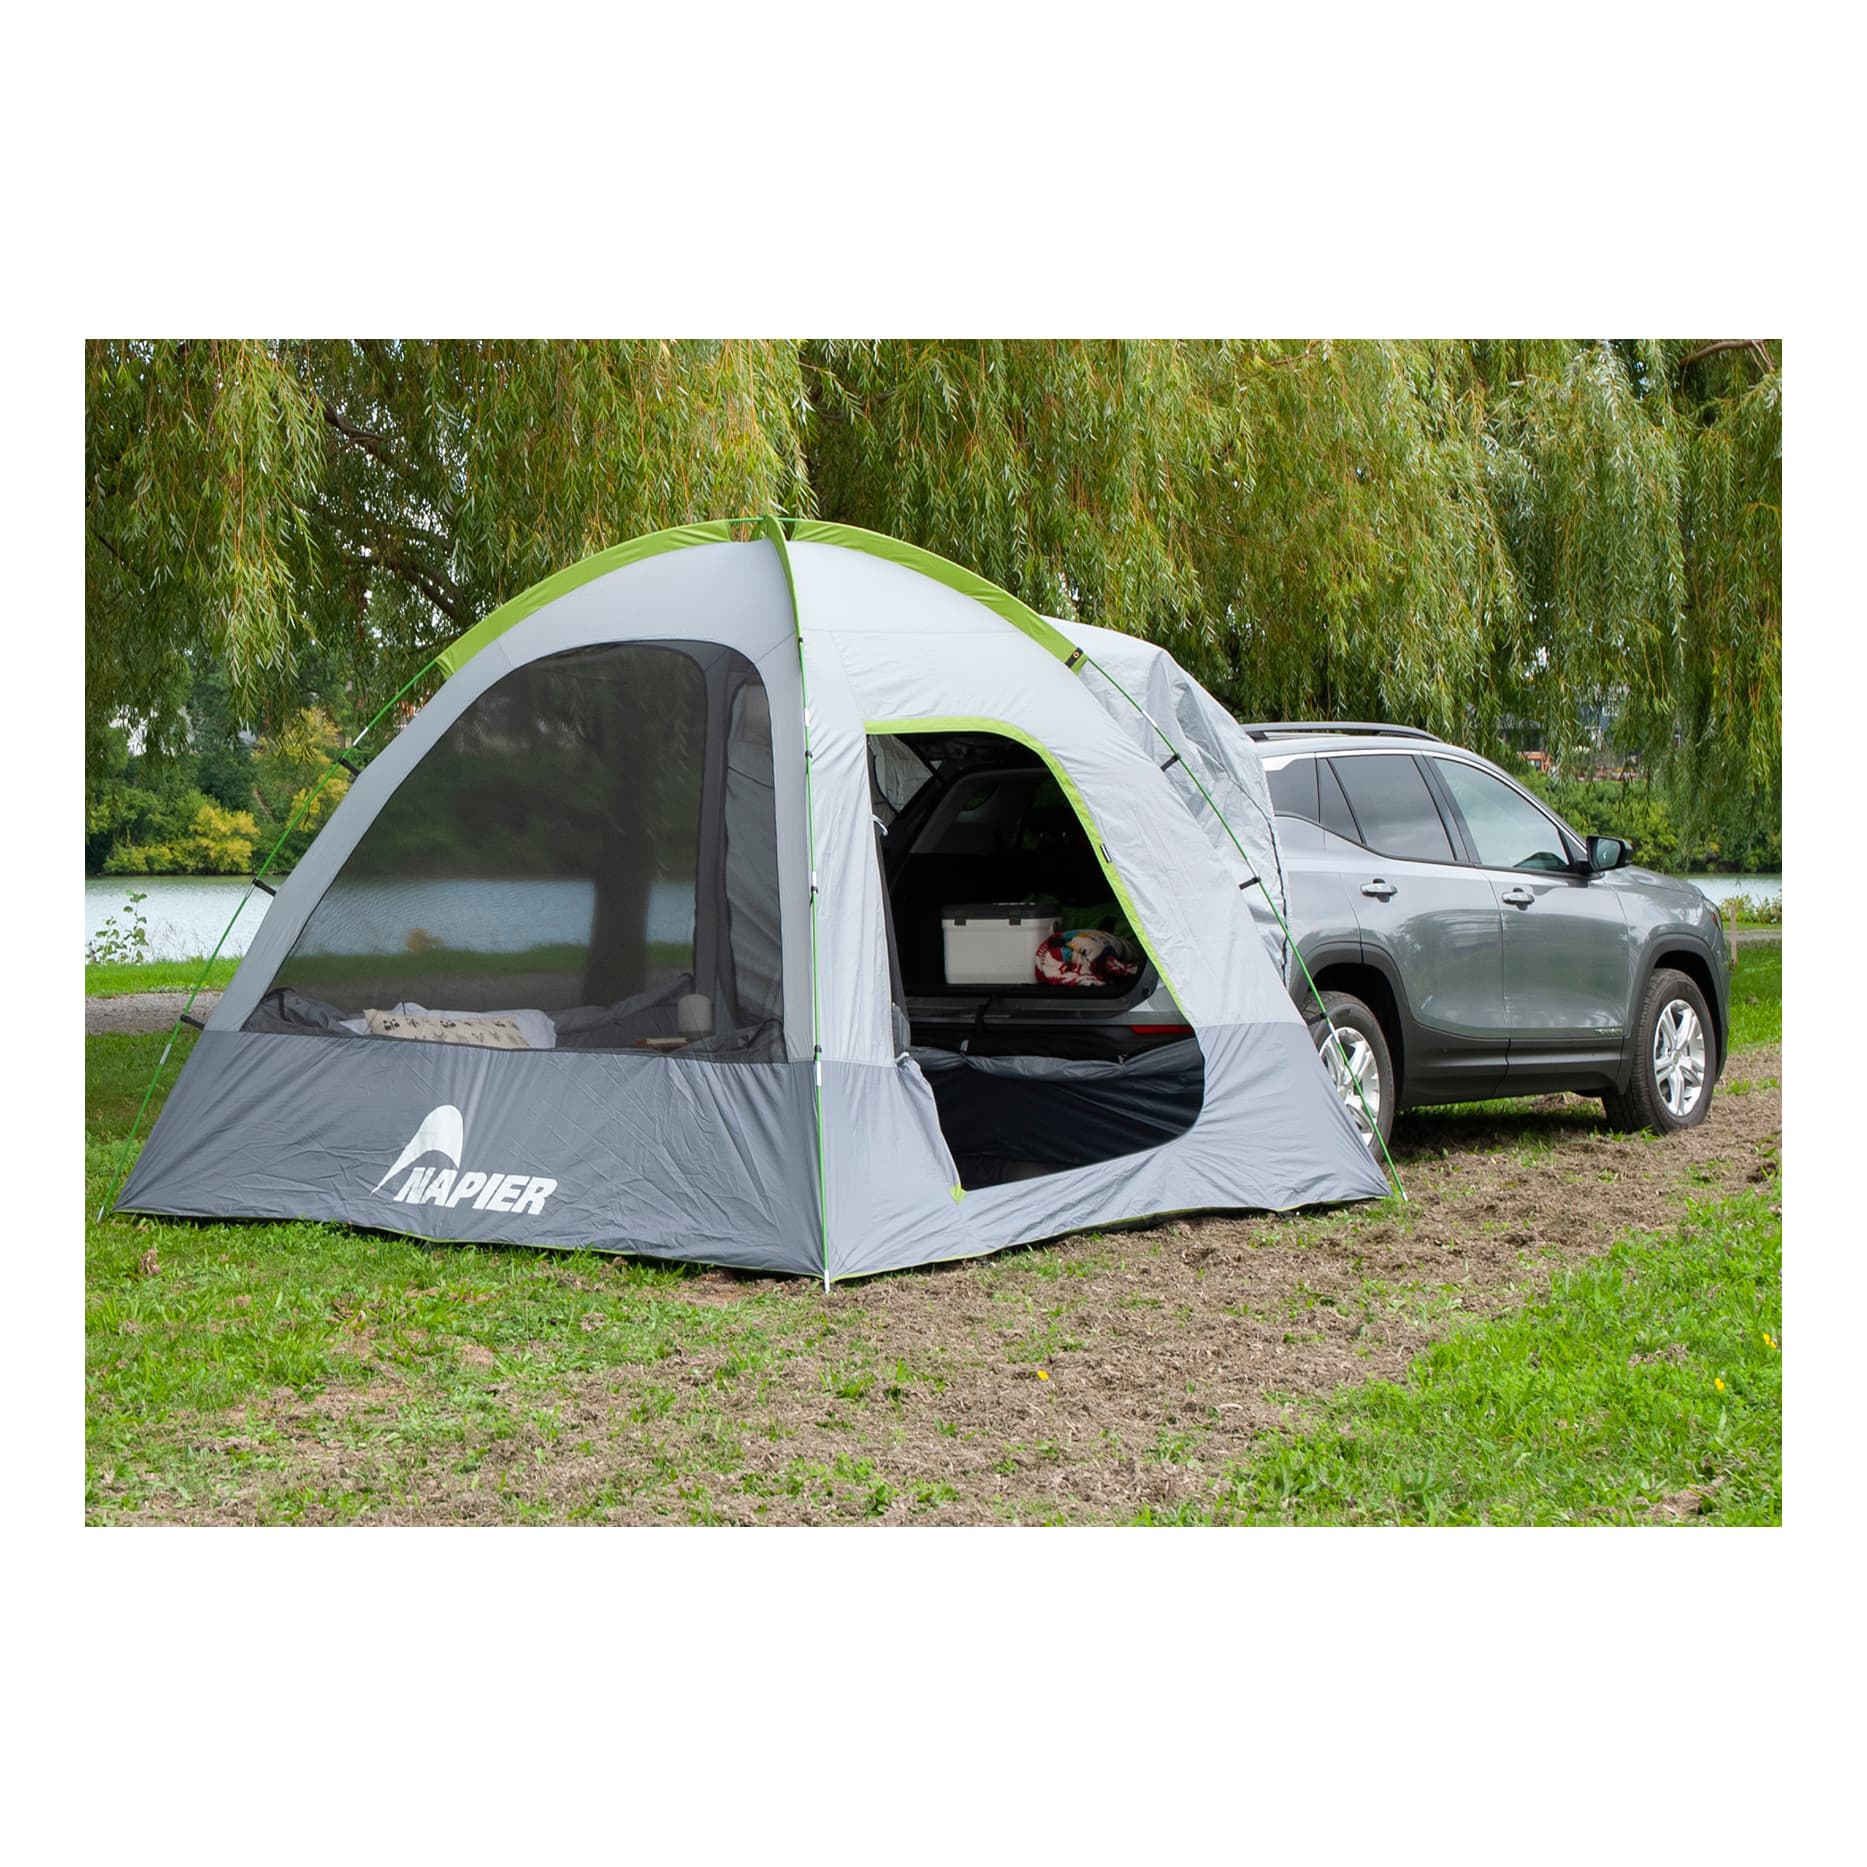 Backroadz SUV Tent - without fly